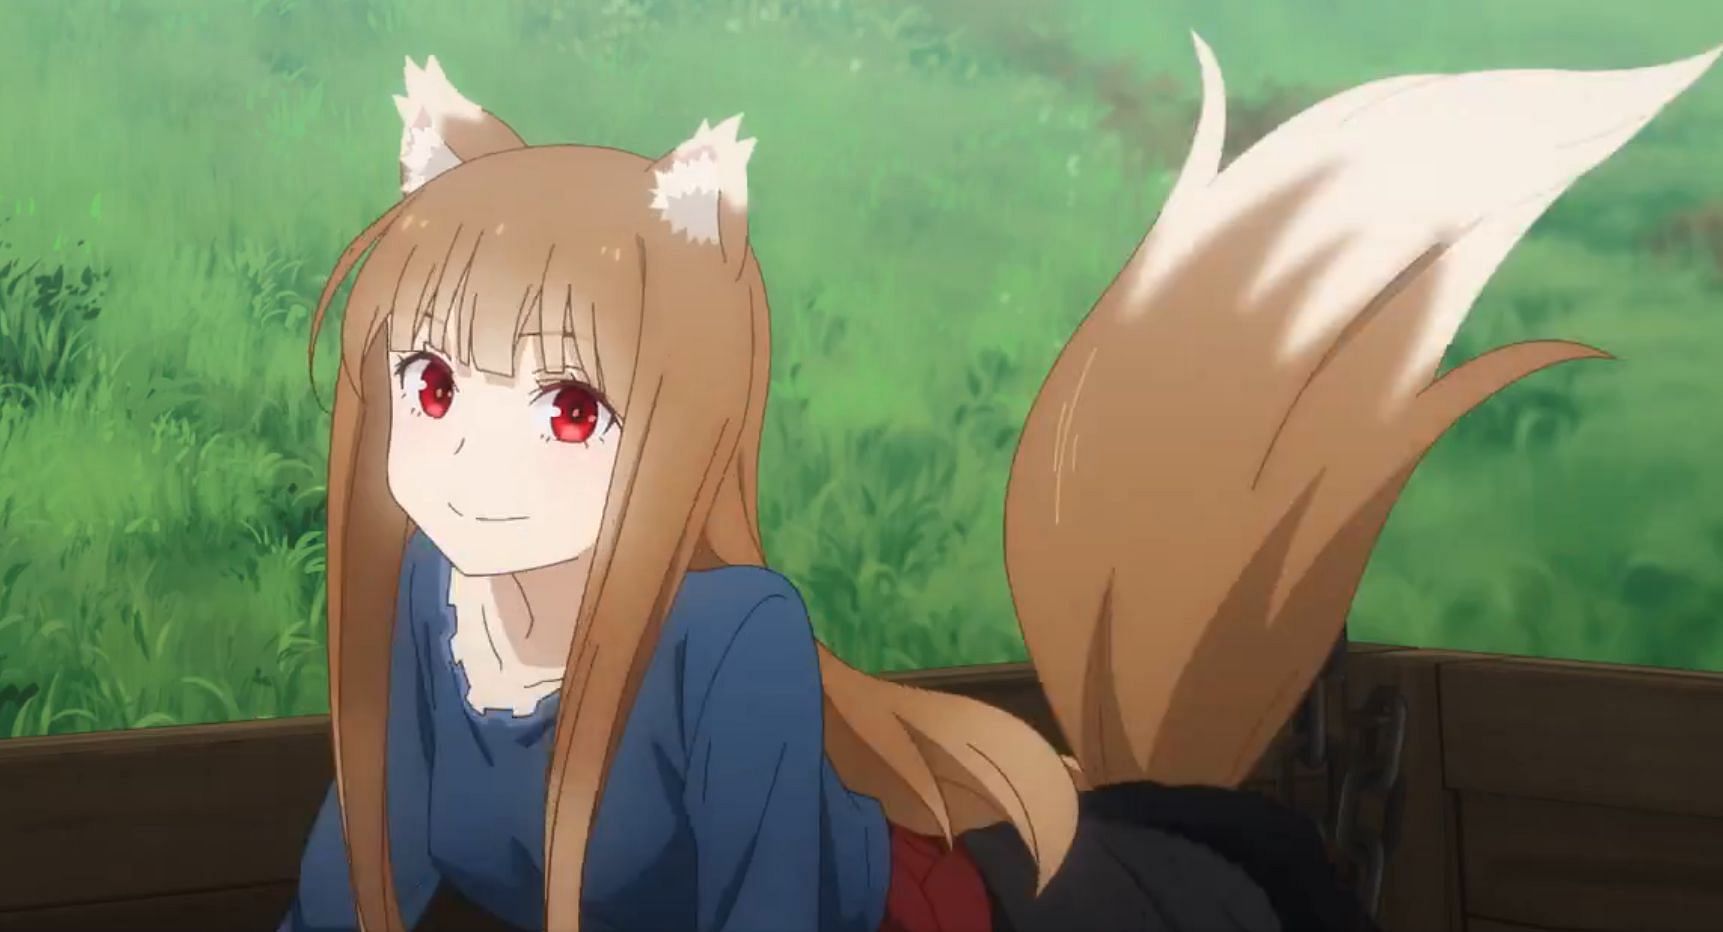 Spice and Wolf (Image via Imagin)